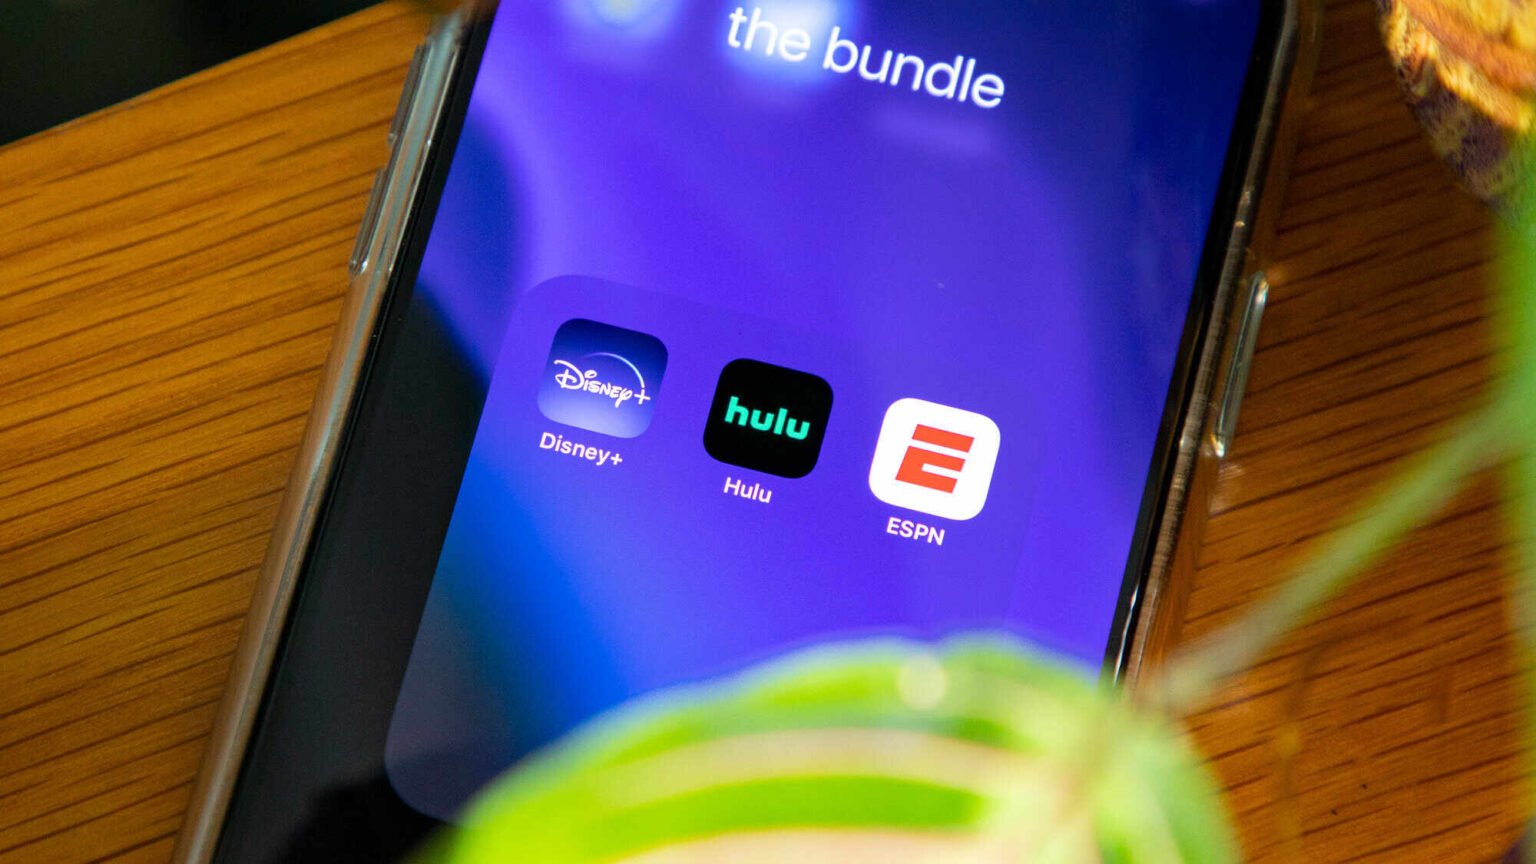 The new Disney+/Hulu bundle with ESPN+ is a really great deal, for the price. is it the right choice for you?